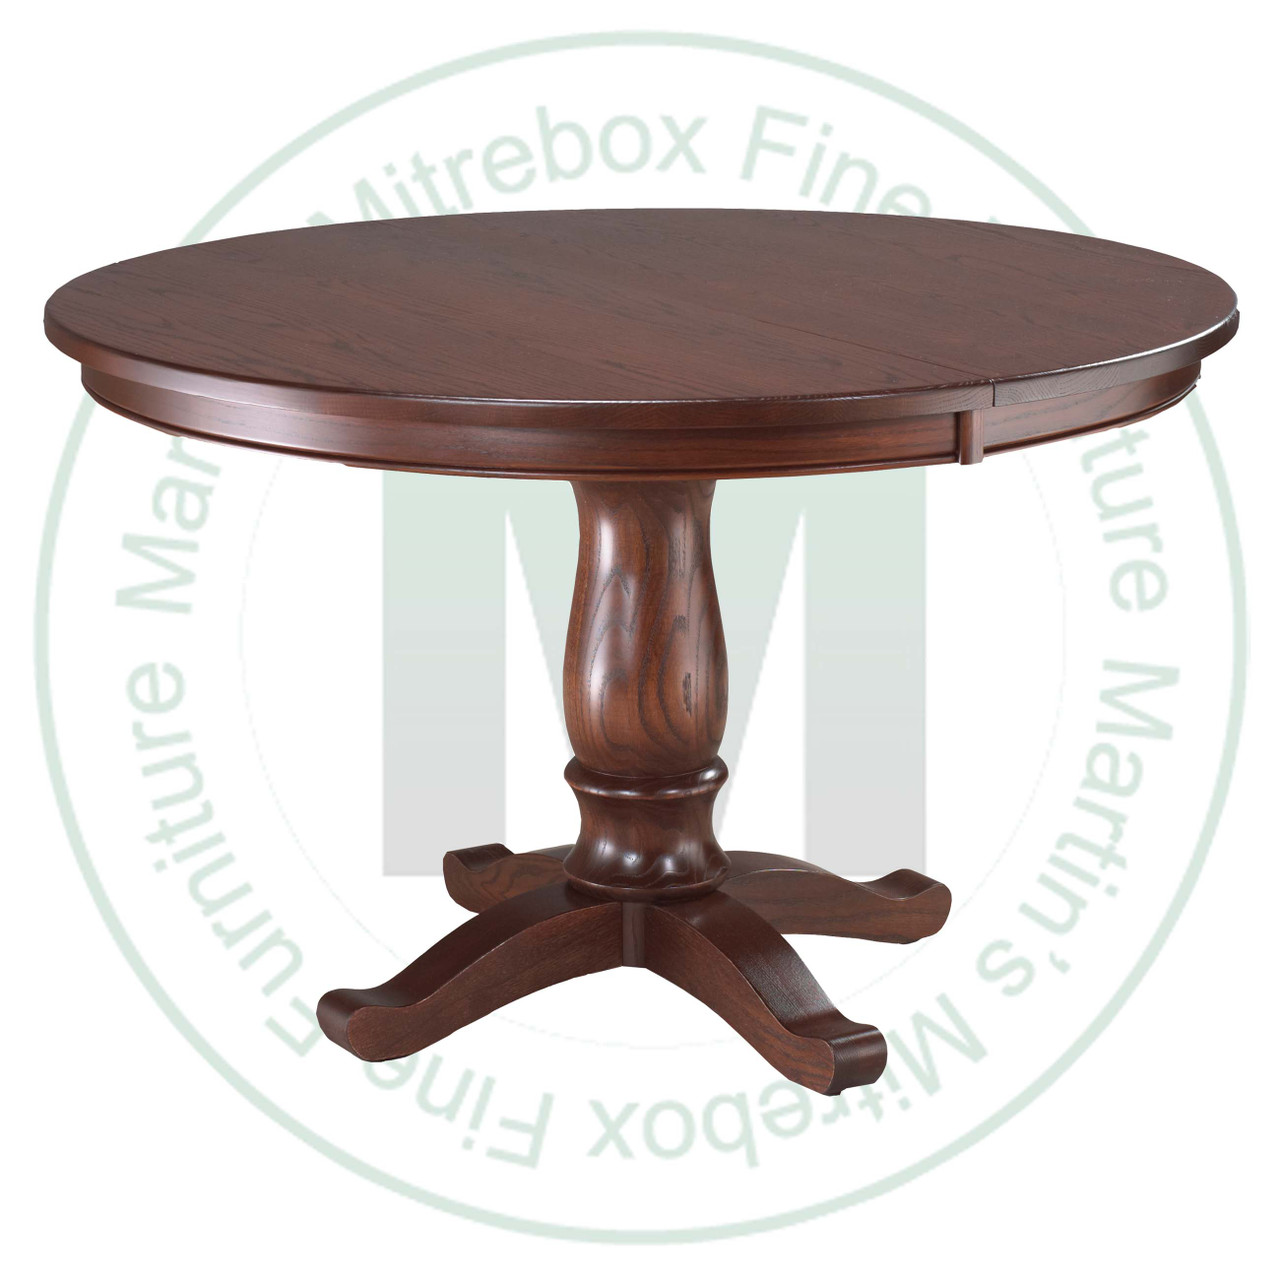 Oak Kimberly Crest Single Pedestal Table 54''D x 54''W x 30''H With 2 - 12'' Leaves Table